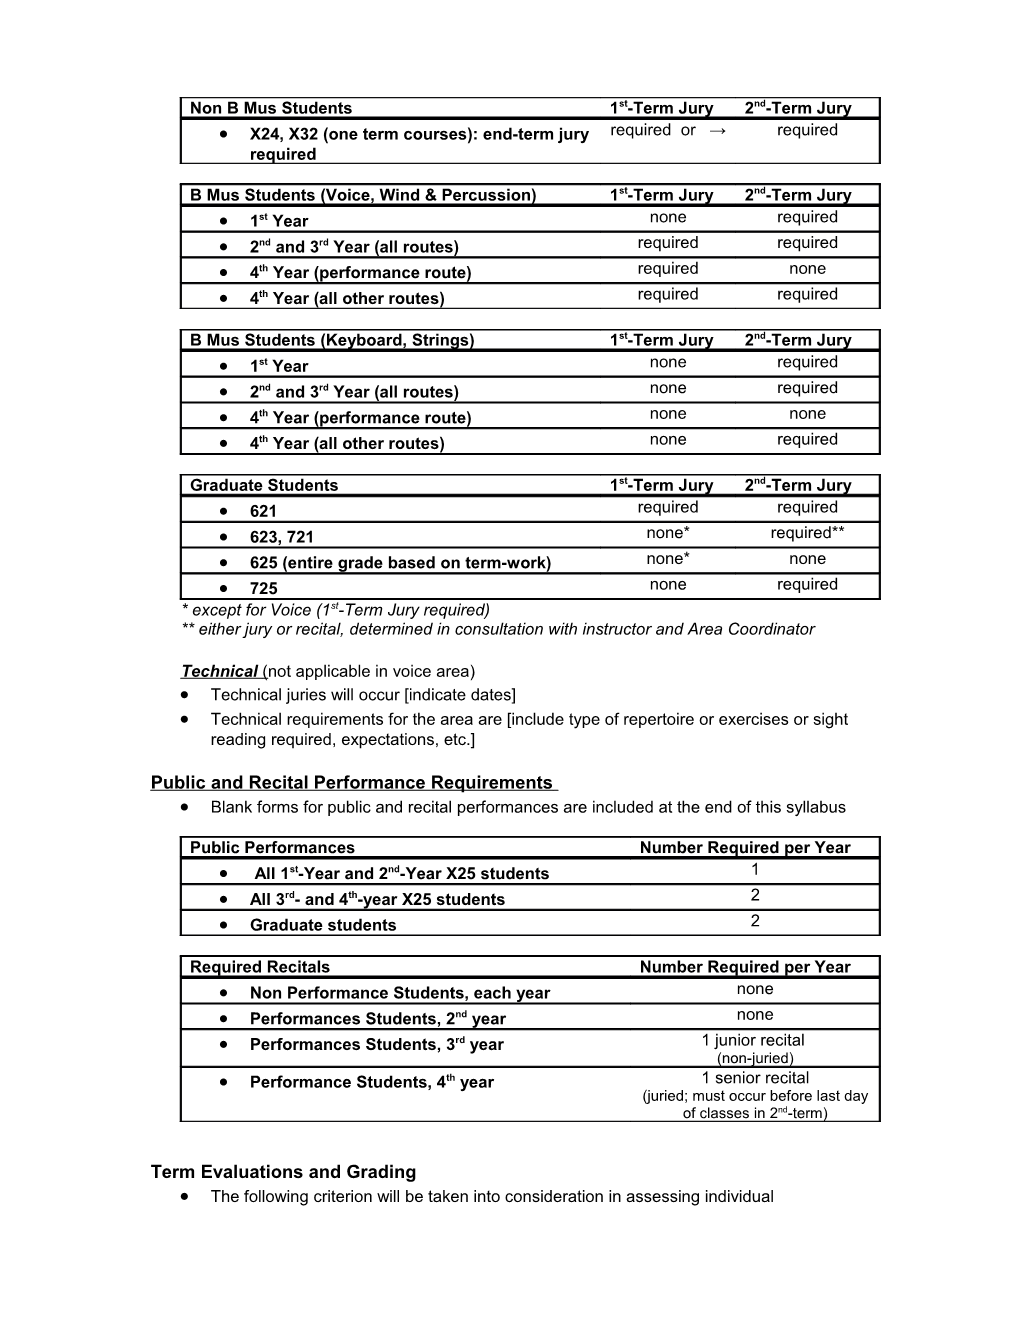 Syllabus Template for Applied Teaching